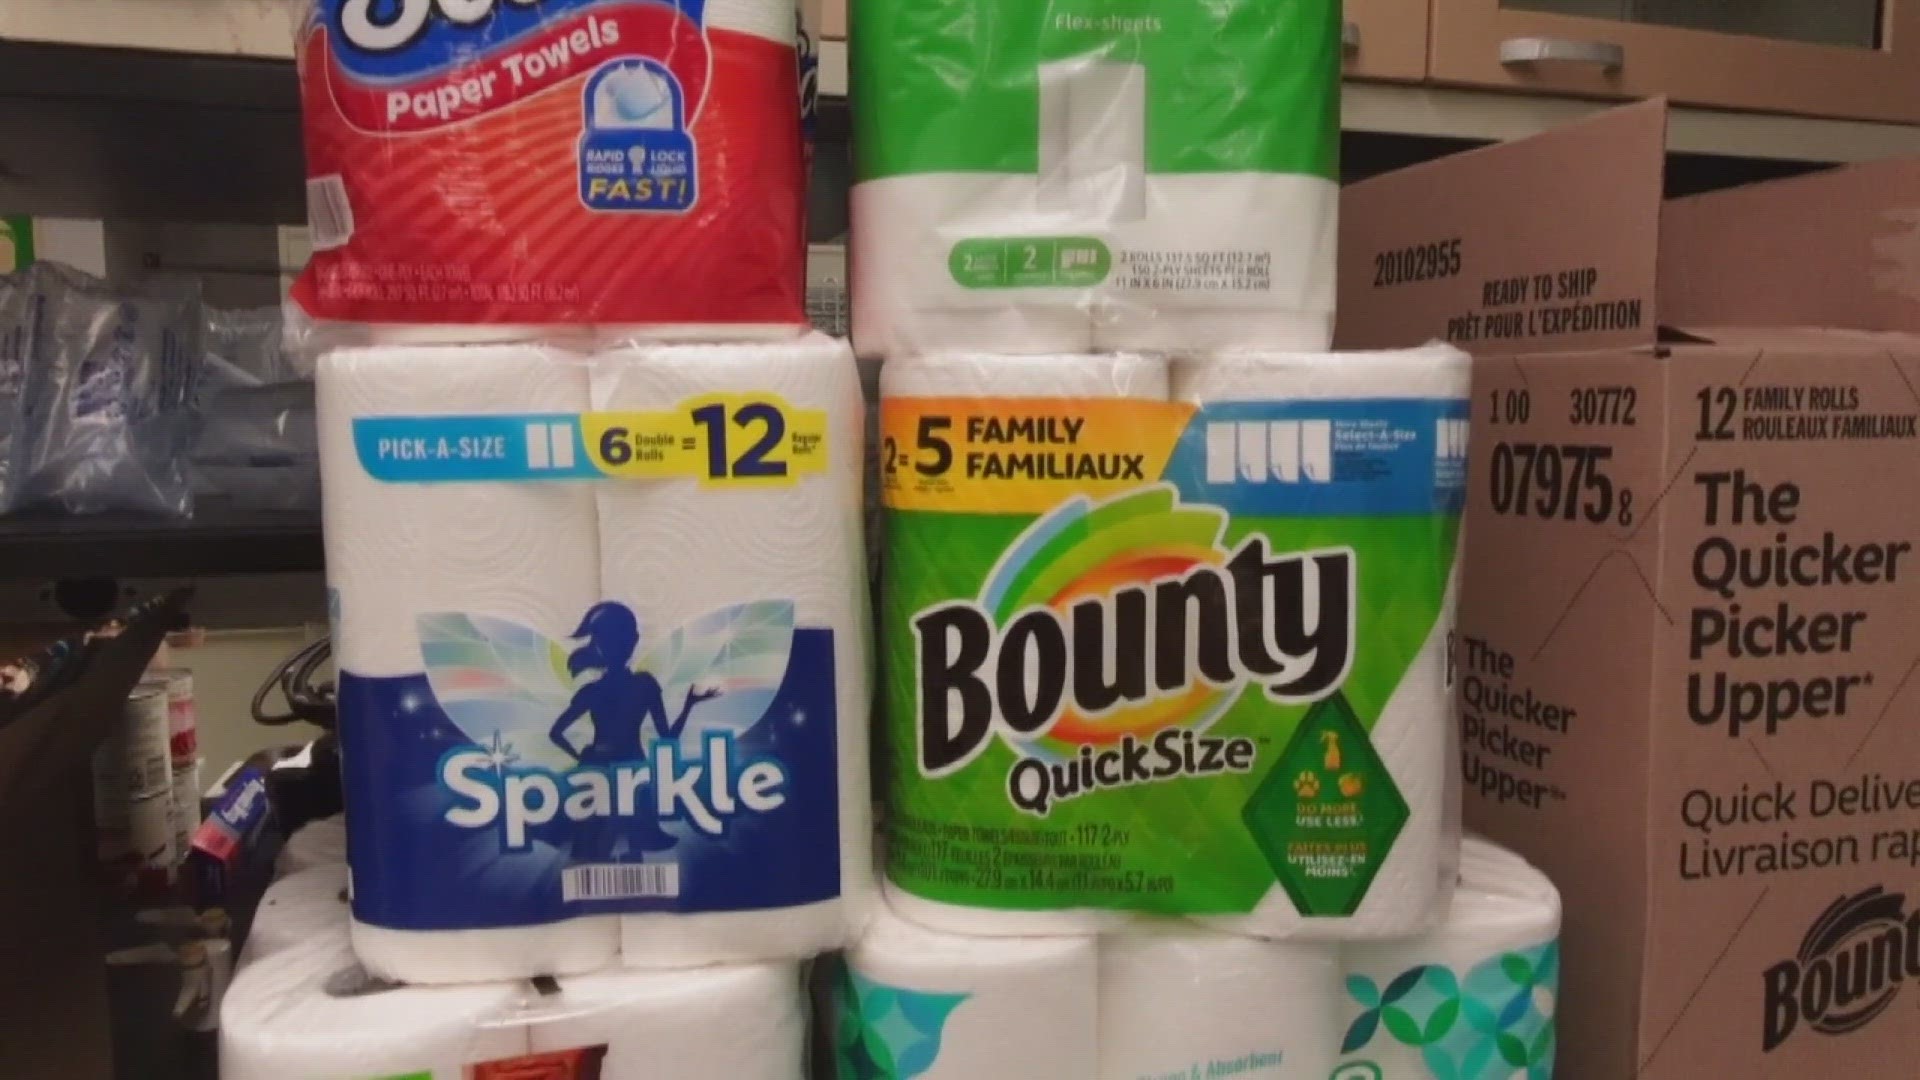 Consumer Reports tested paper towels' strength and pickup quality and compared them to cost.